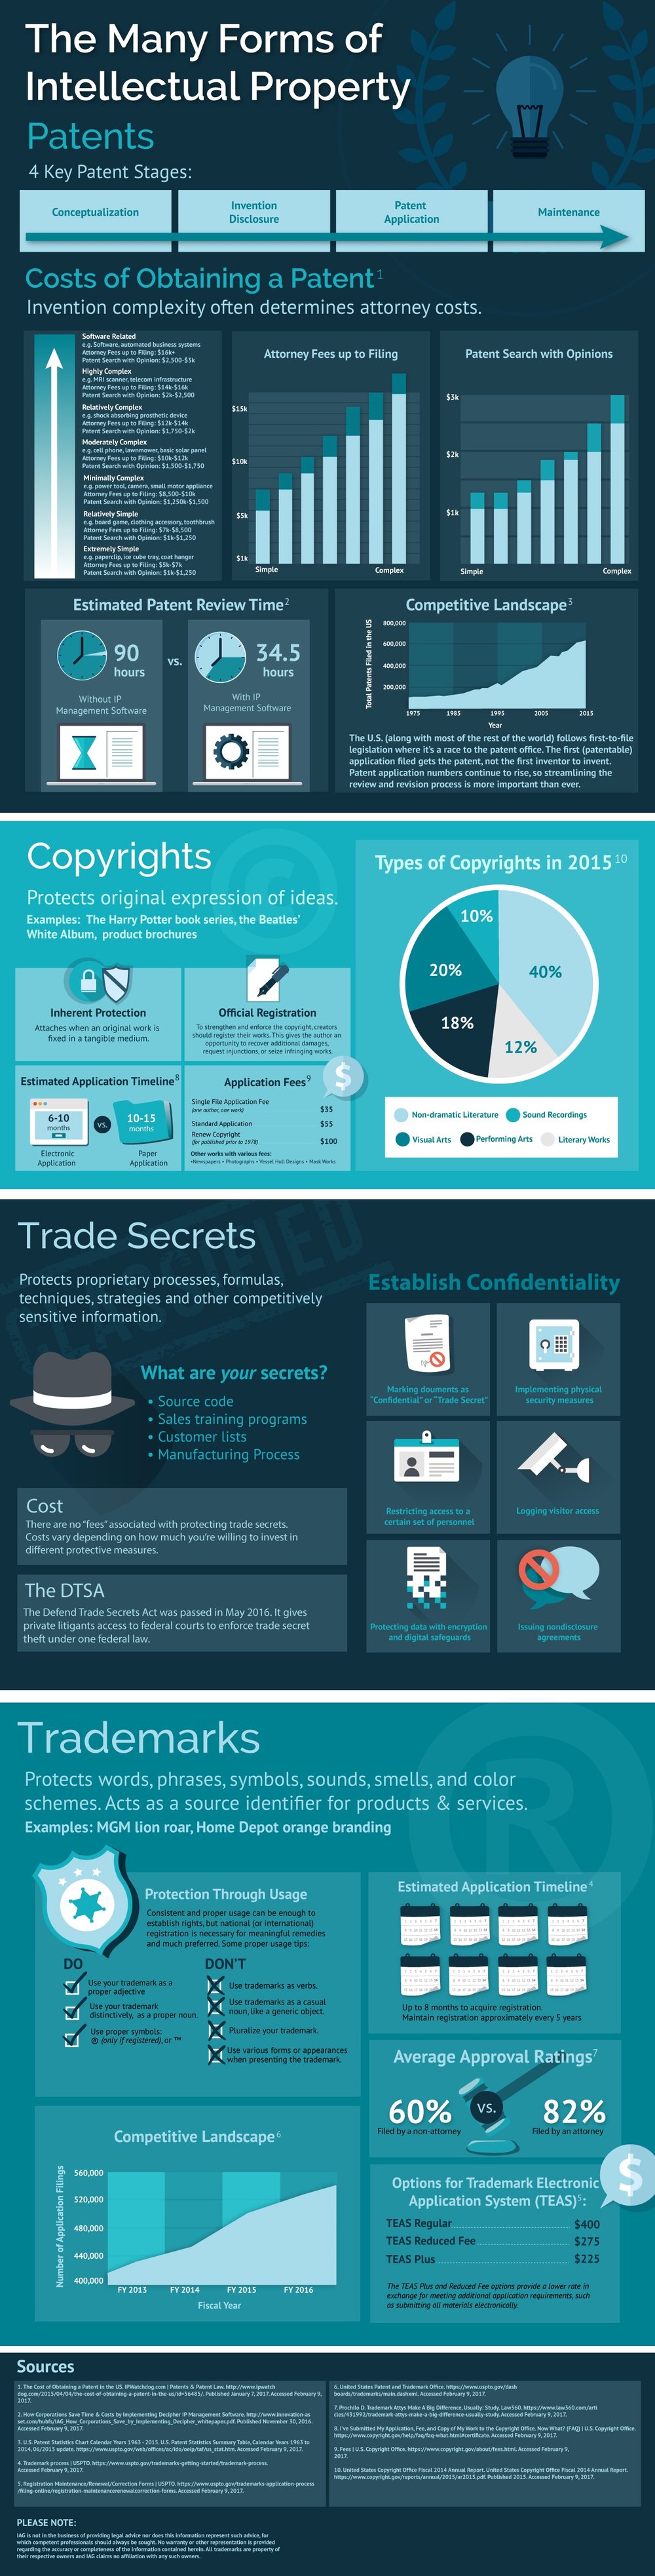 IAG_Many_Forms_of_Intellectual_Property_infographic